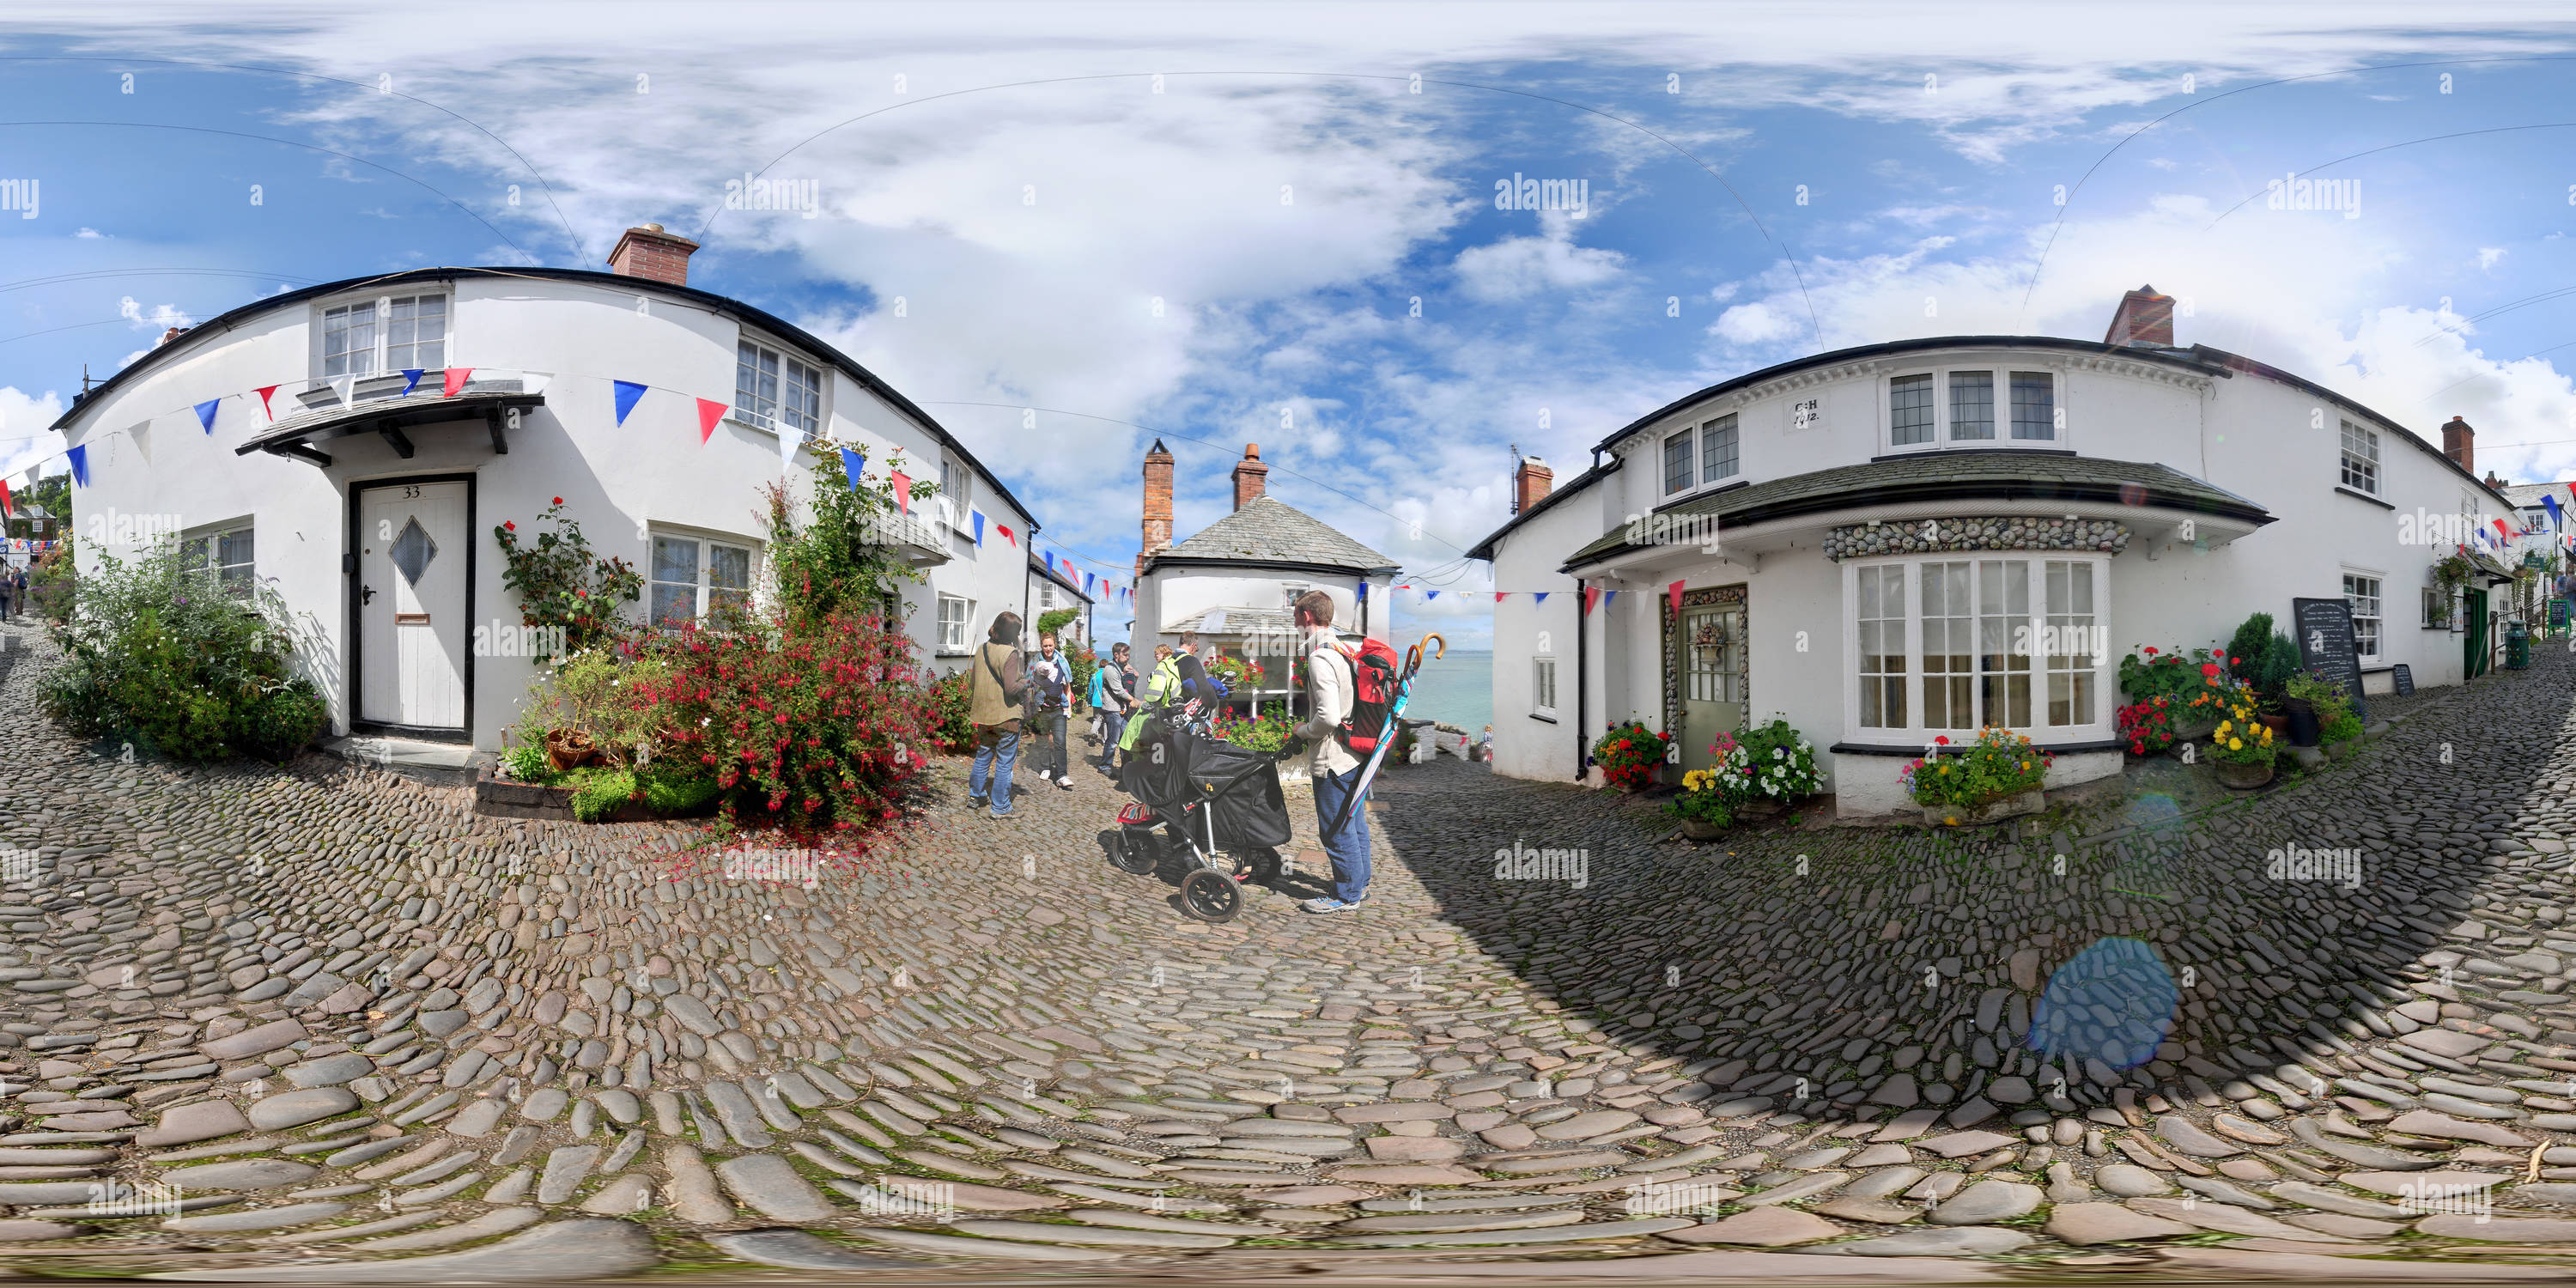 360 degree panoramic view of Clovelly High Street